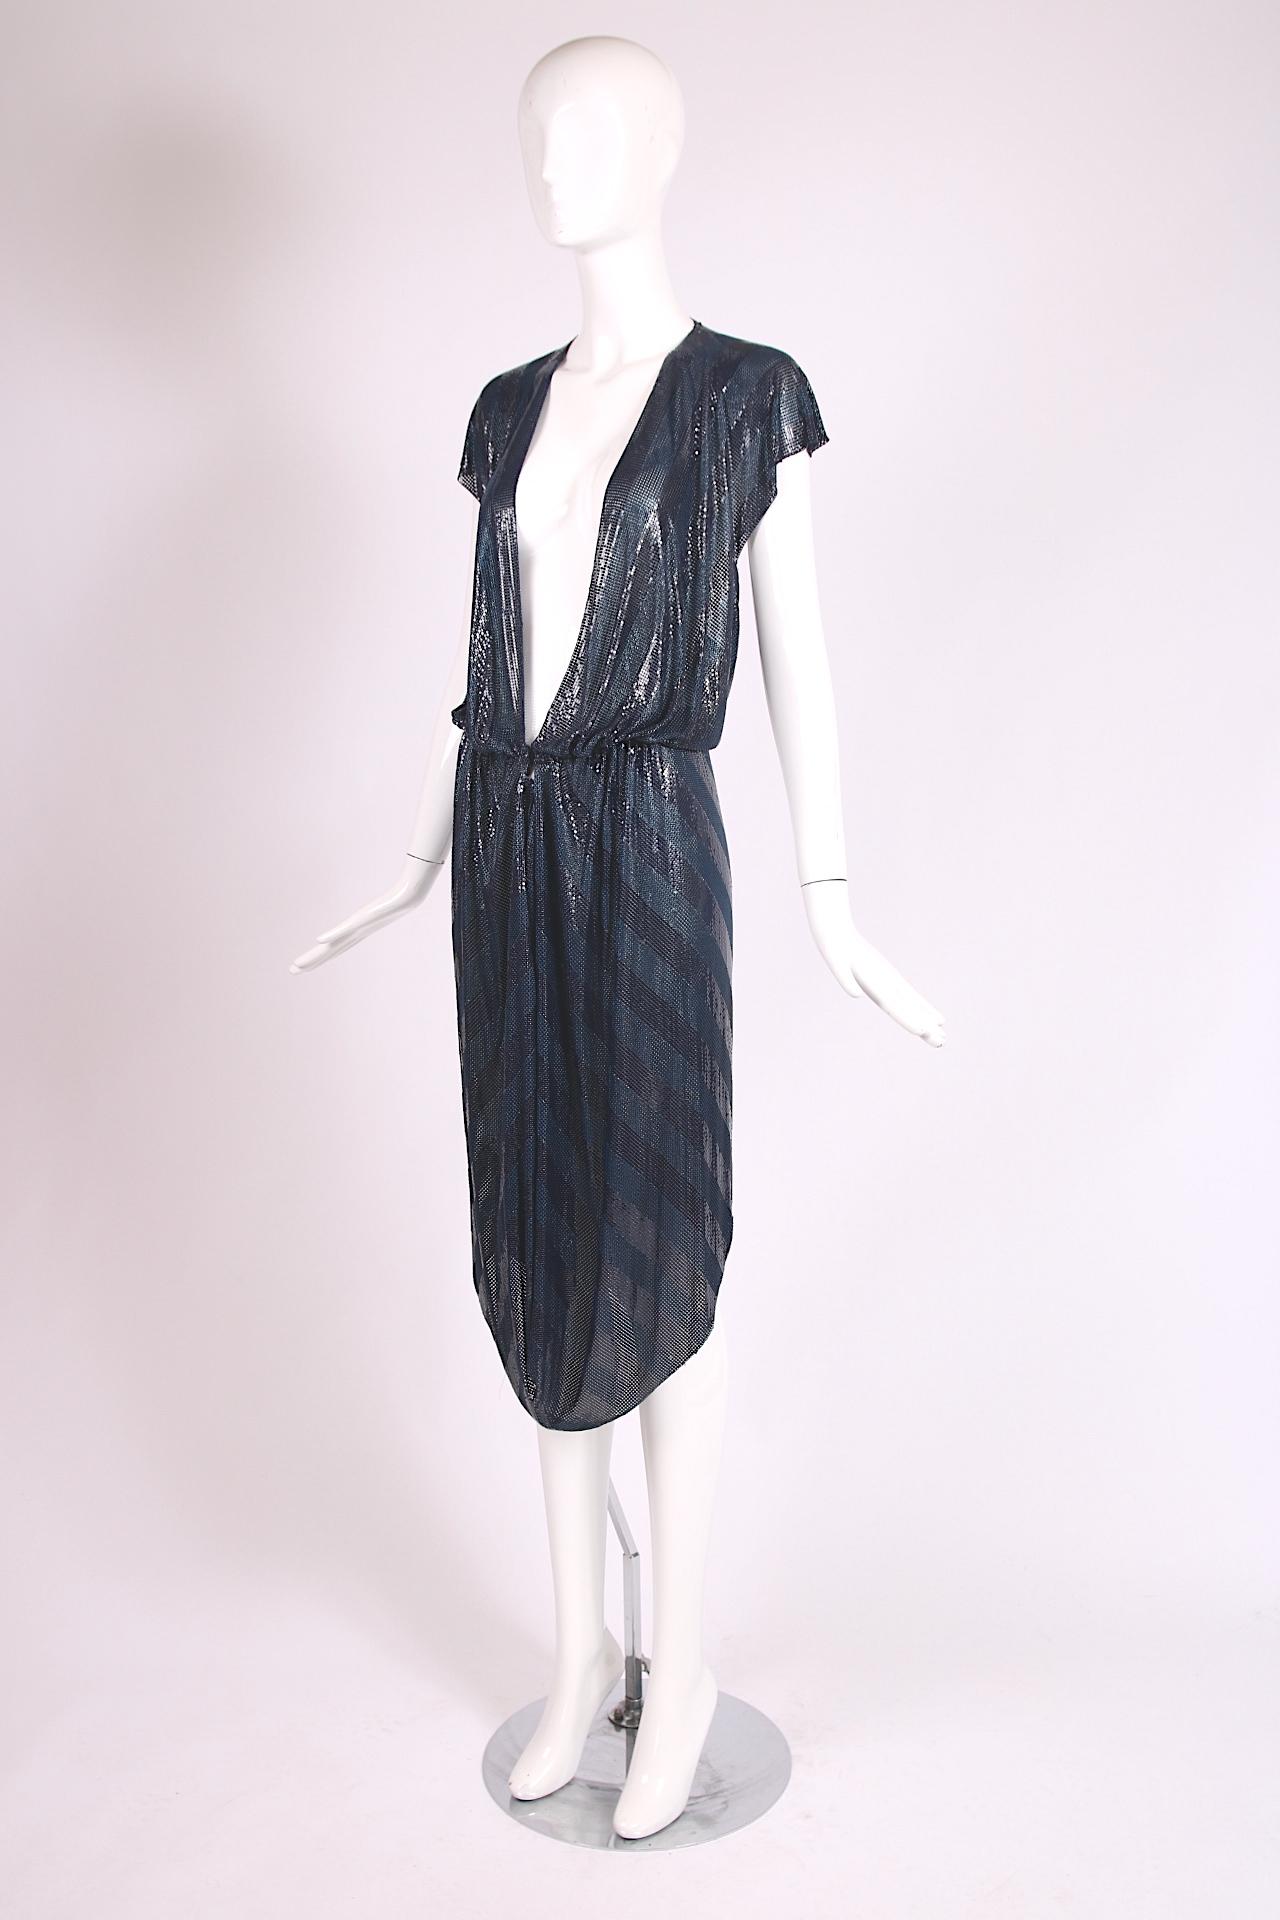 Vintage Gianni Versace Navy Striped Oroton Metal Mesh Chainmail Dress Ca. 1983 For Sale 1